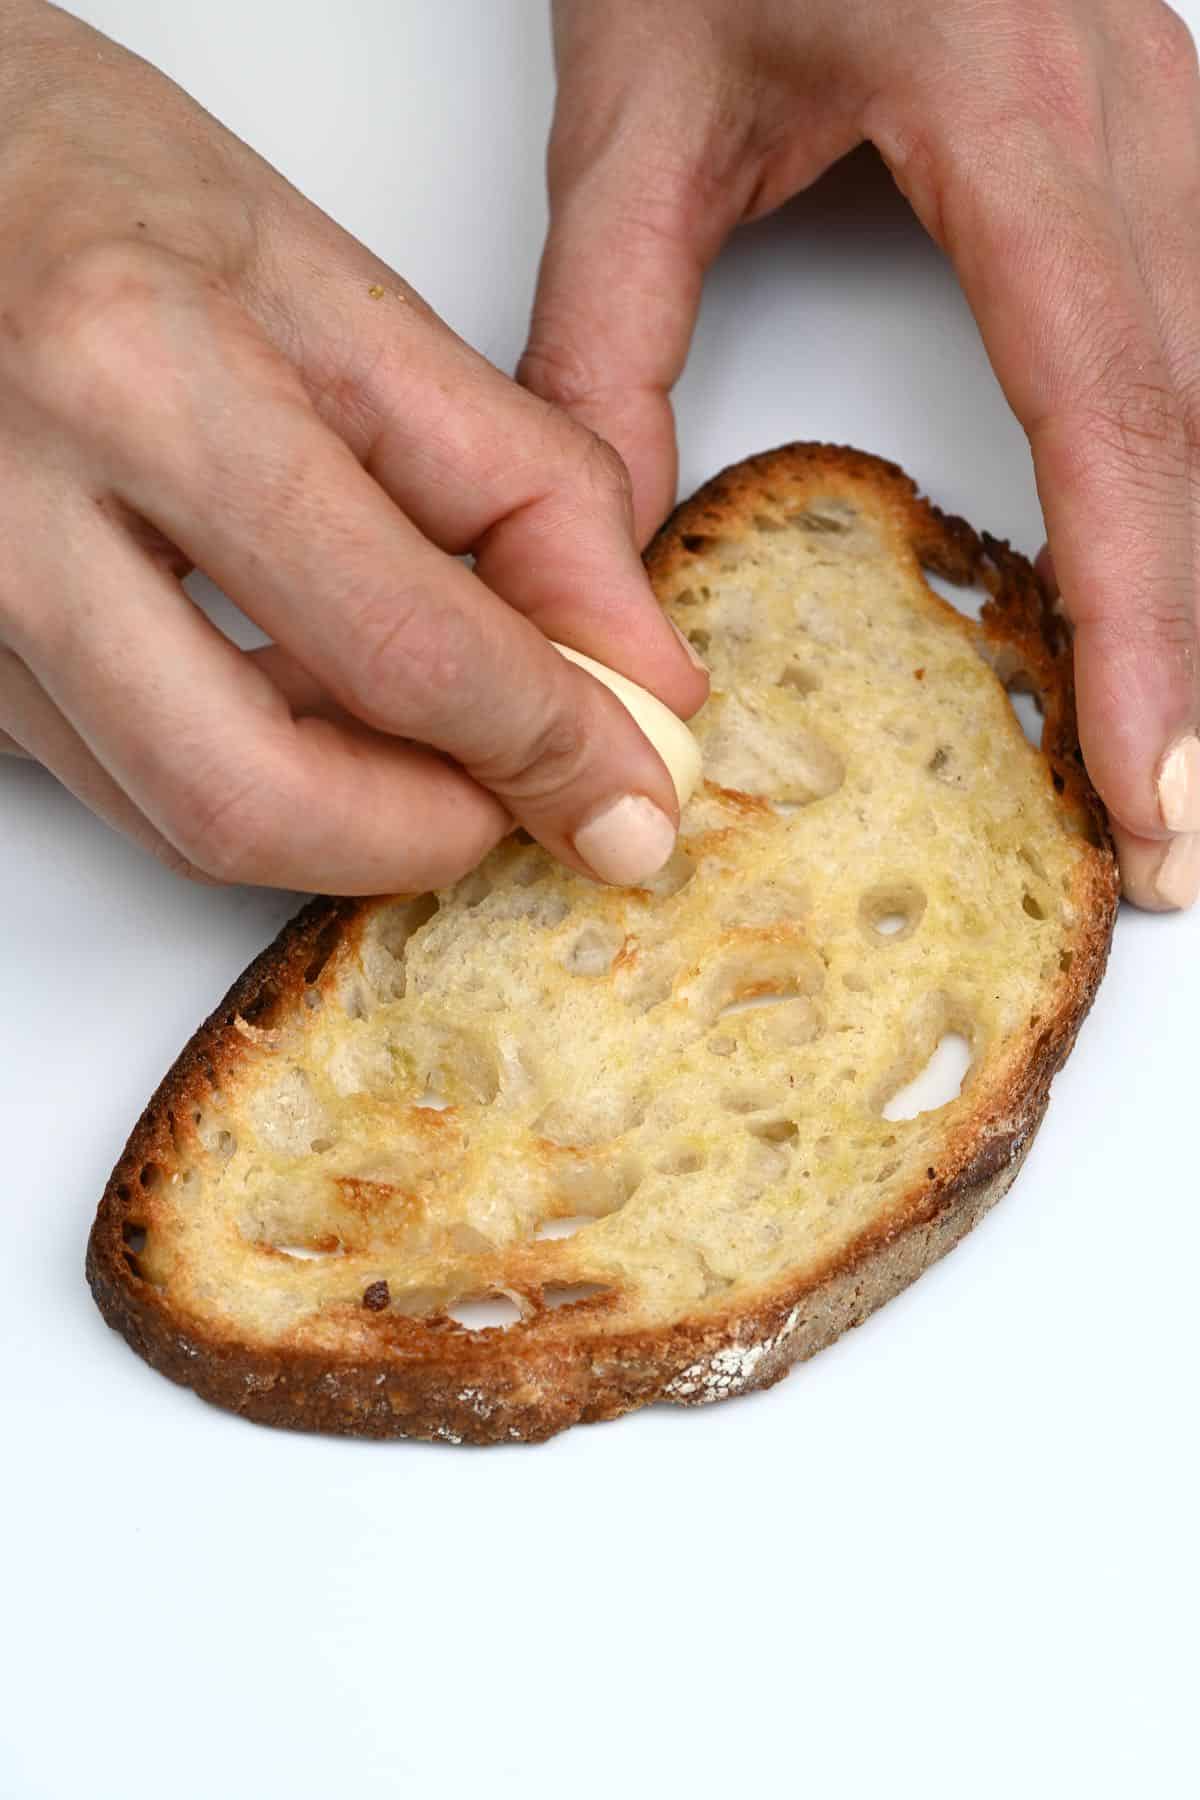 Rubbing toasted bread with garlic